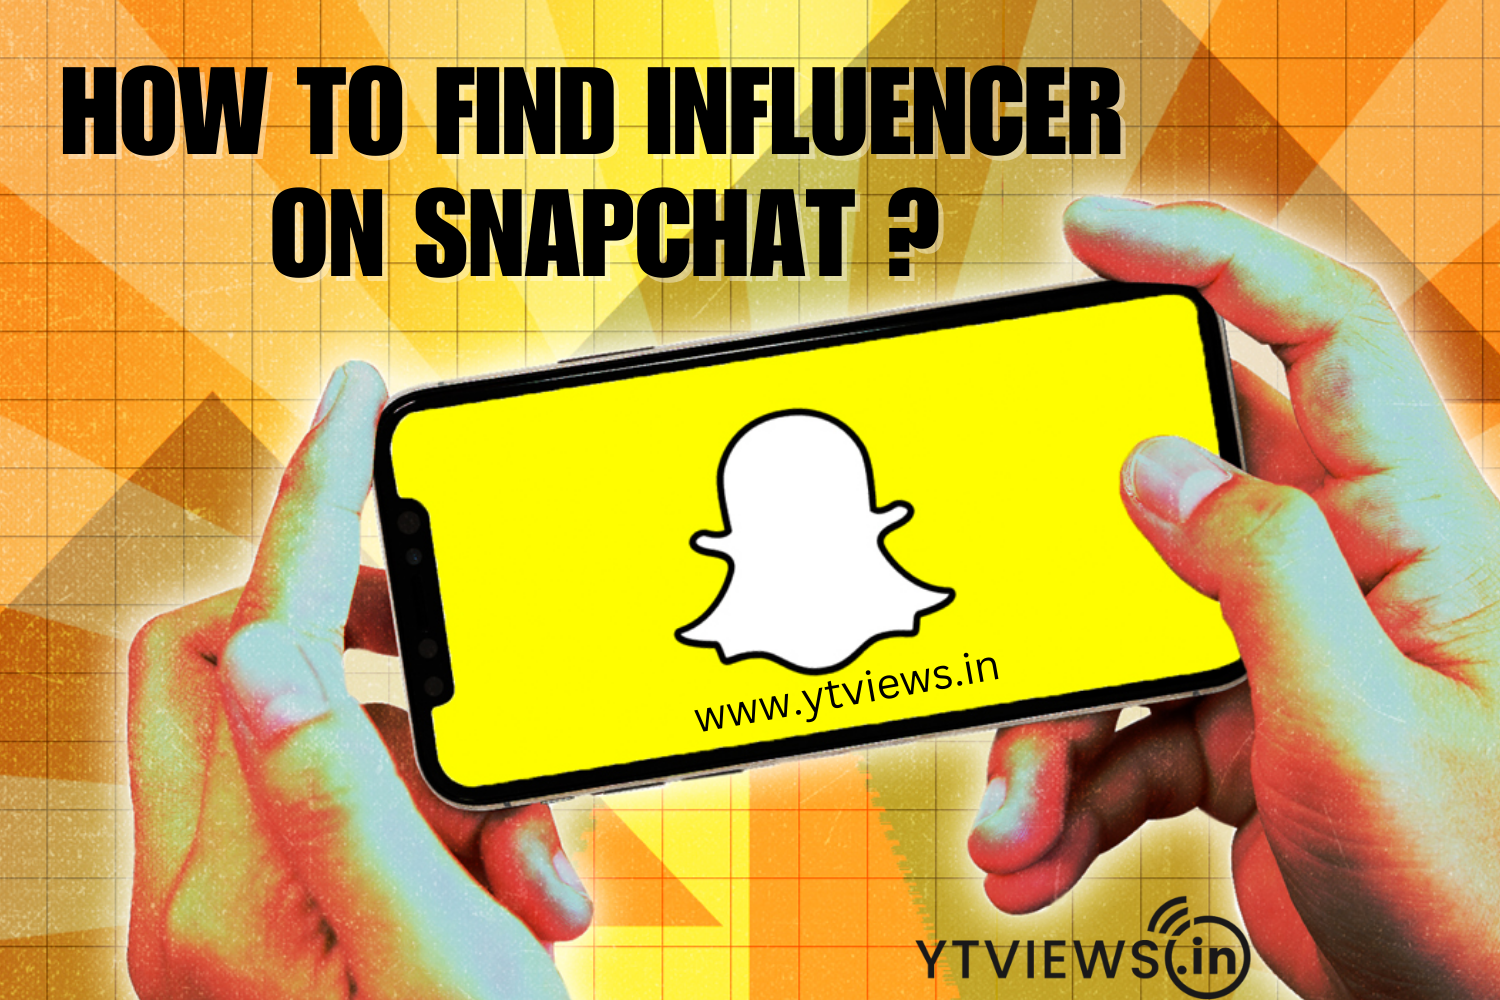 How to find influencers on Snapchat